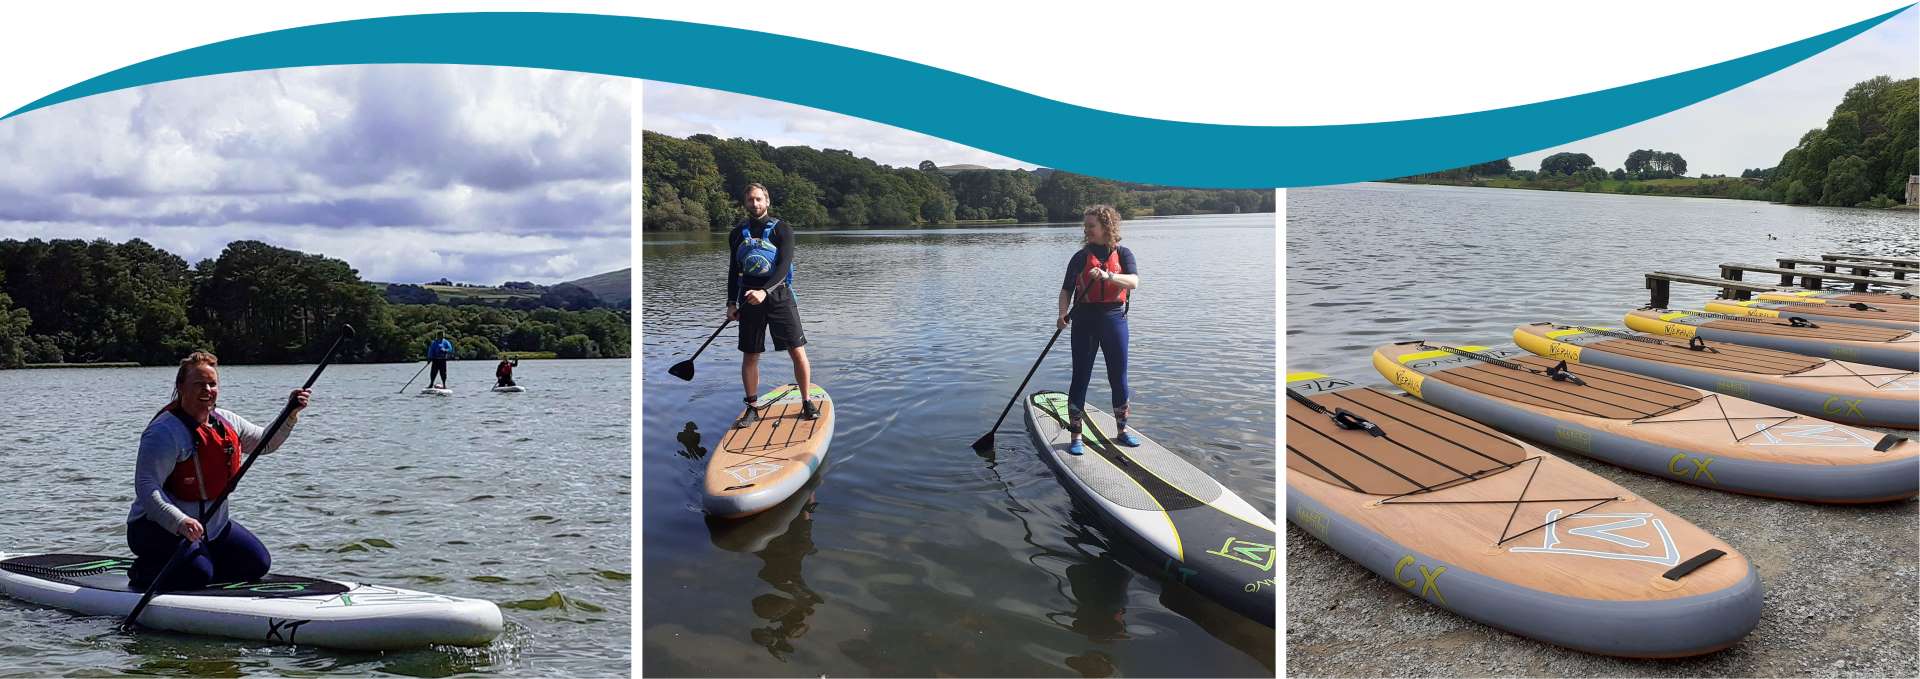 SUP Classes in Cumbria - Stand Up Paddle Boarding